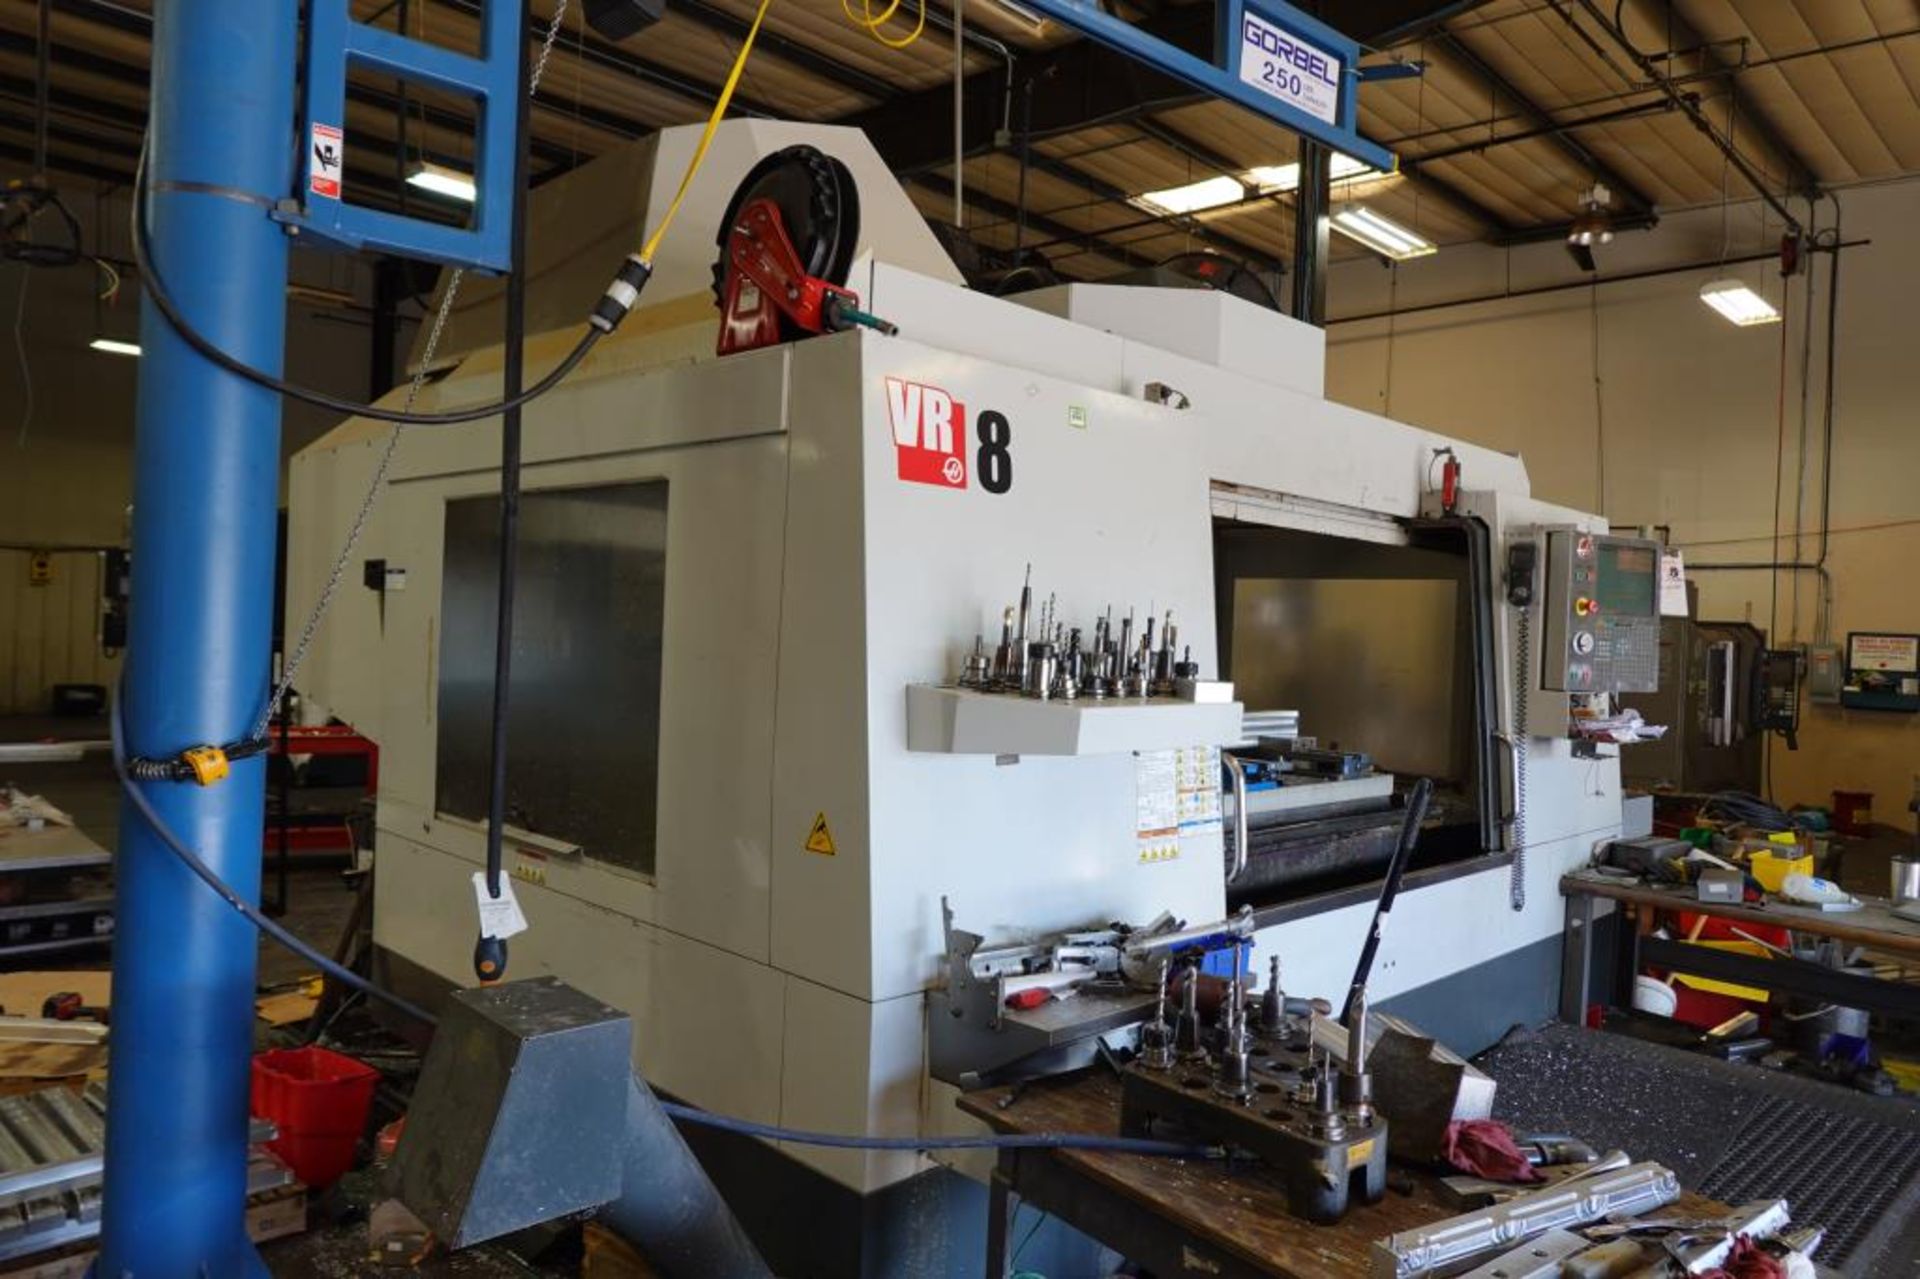 Haas VR8 5 Axis Articulating Spindle CNC - Image 3 of 16